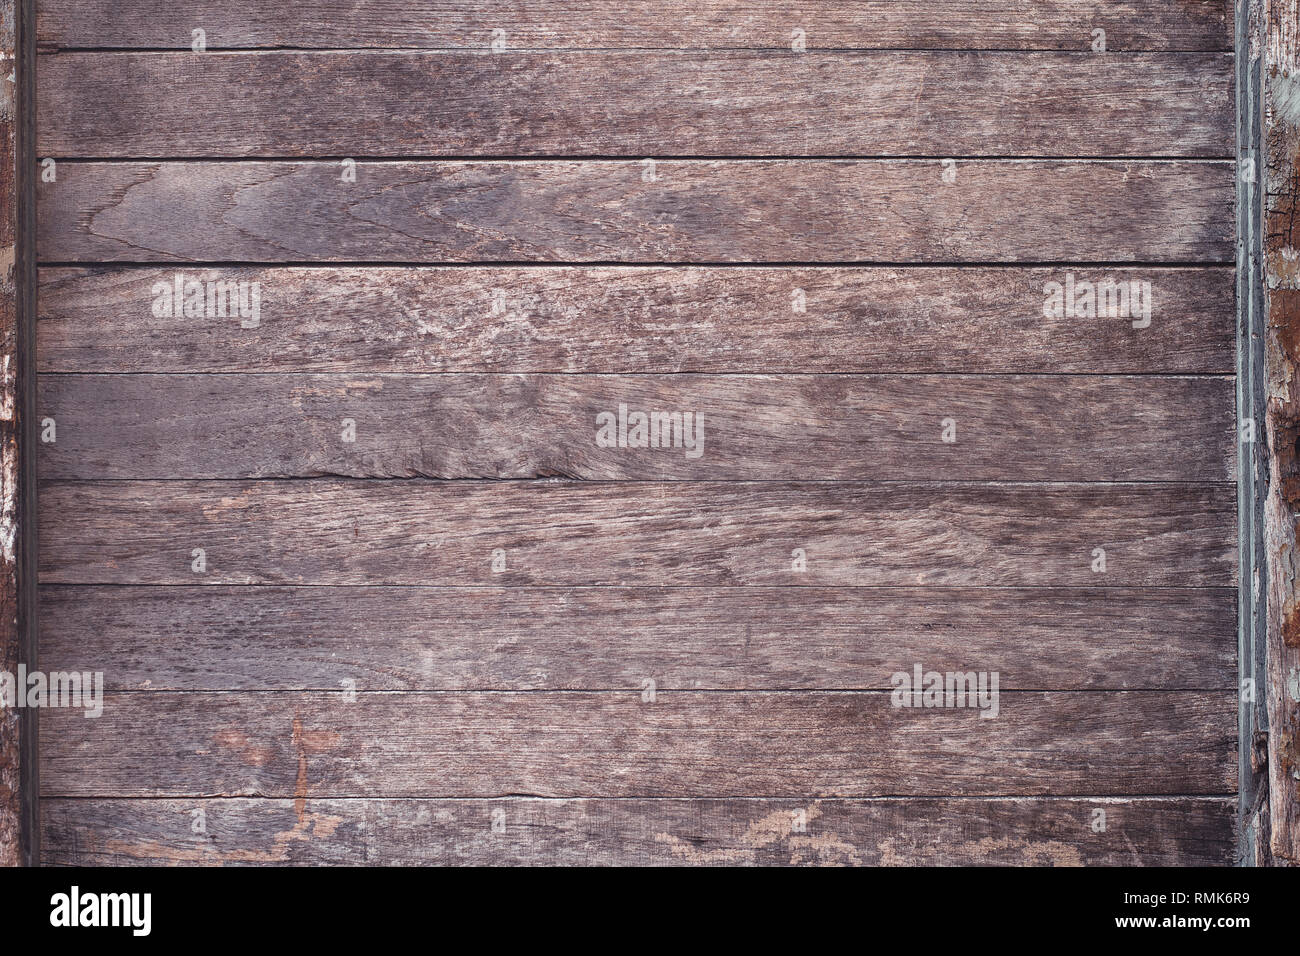 old wood texture table top.use us background design for vintage background Stock Photo